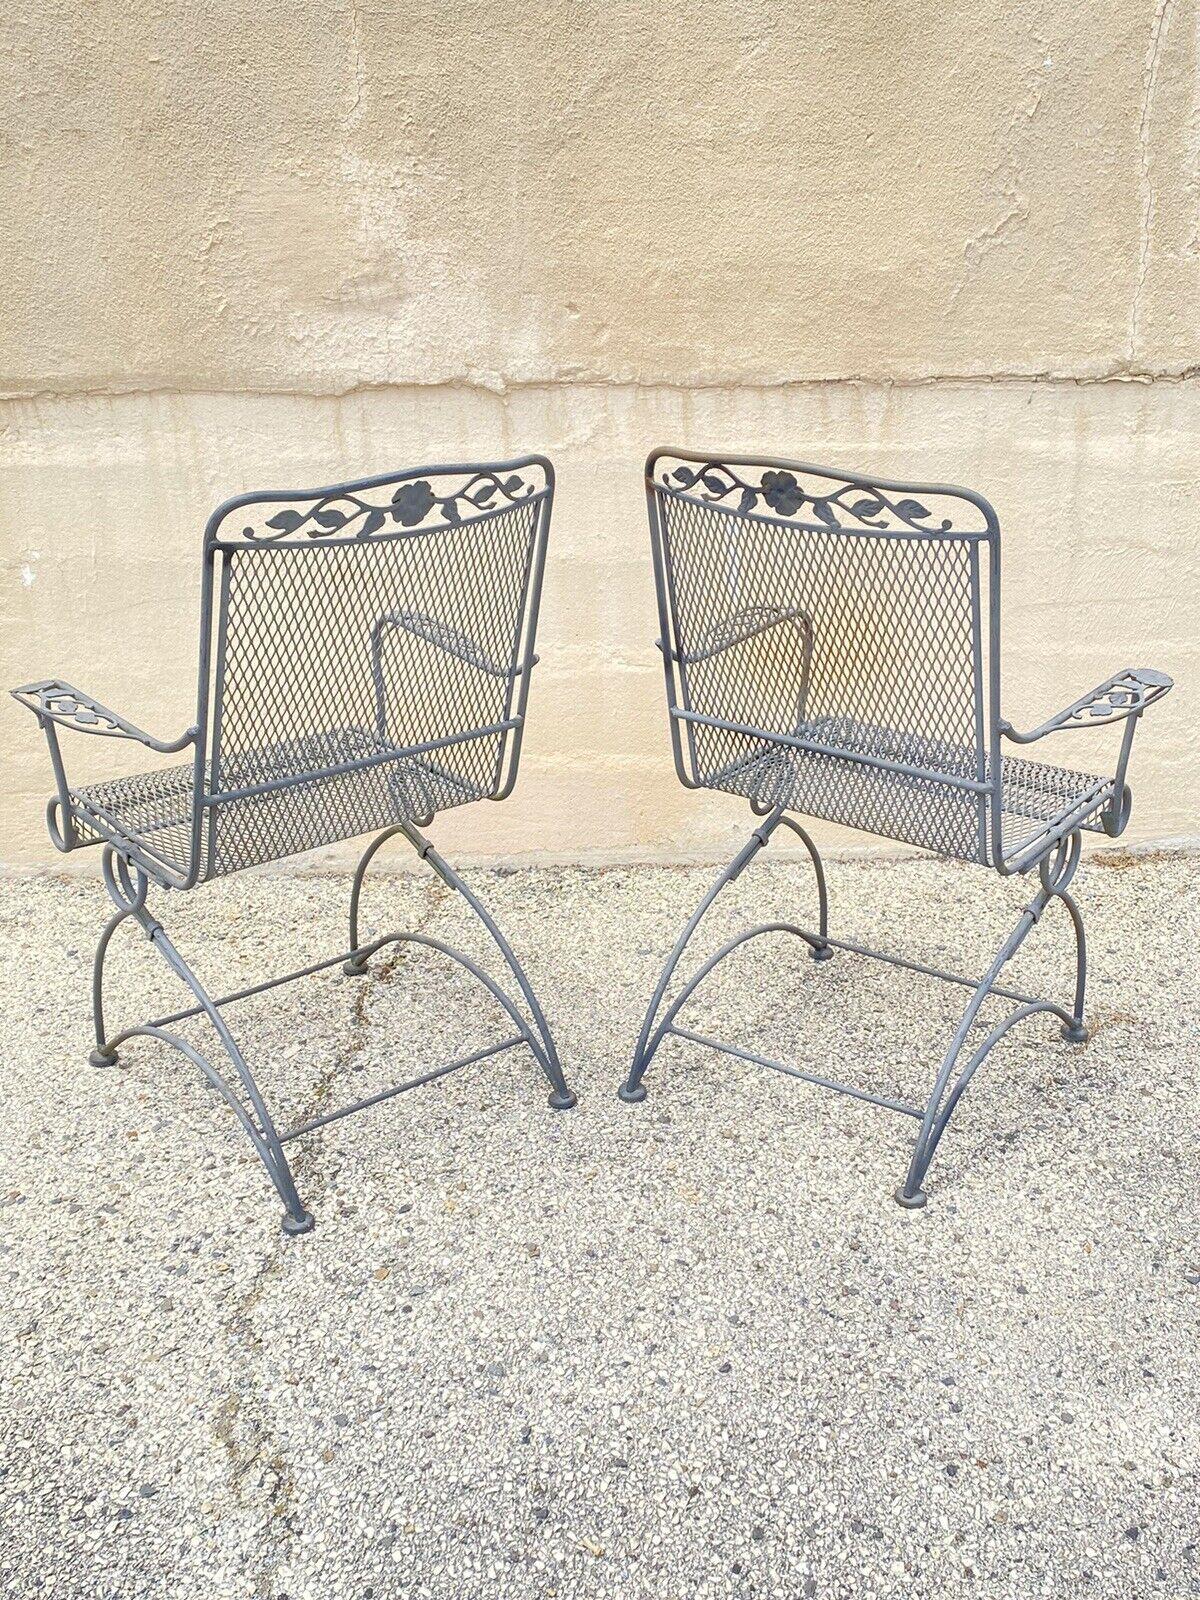 Vintage Meadowcraft Dogwood Coil Spring Wrought Iron Garden Patio Chair, a Pair 4